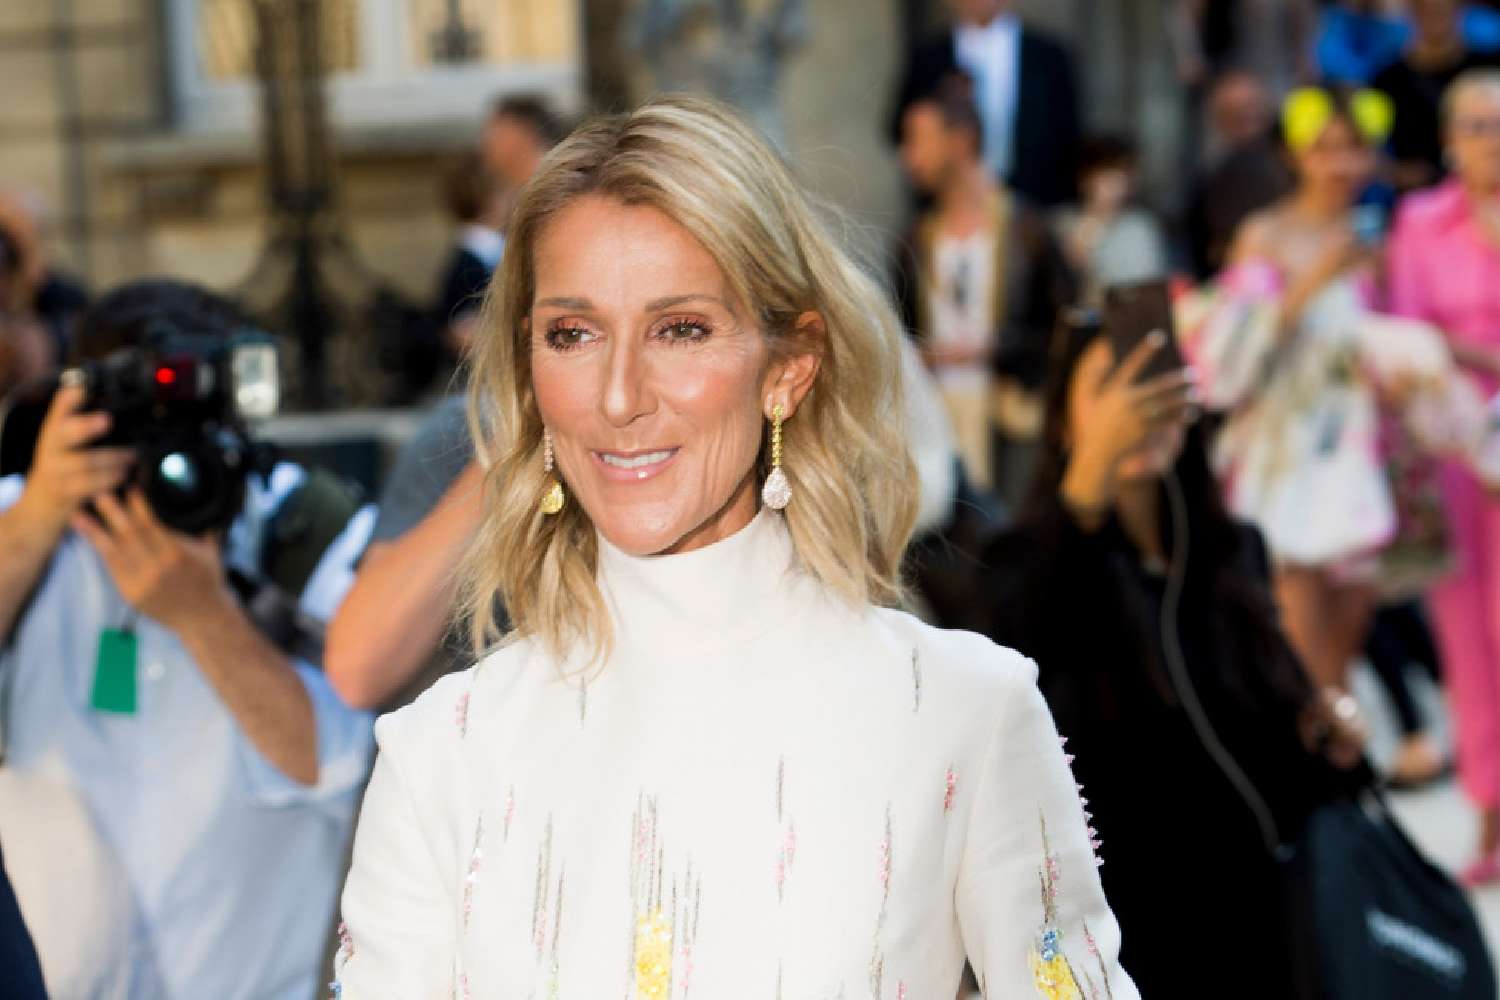 Celine Dion 2023 world tour cancelled Here's everything we know